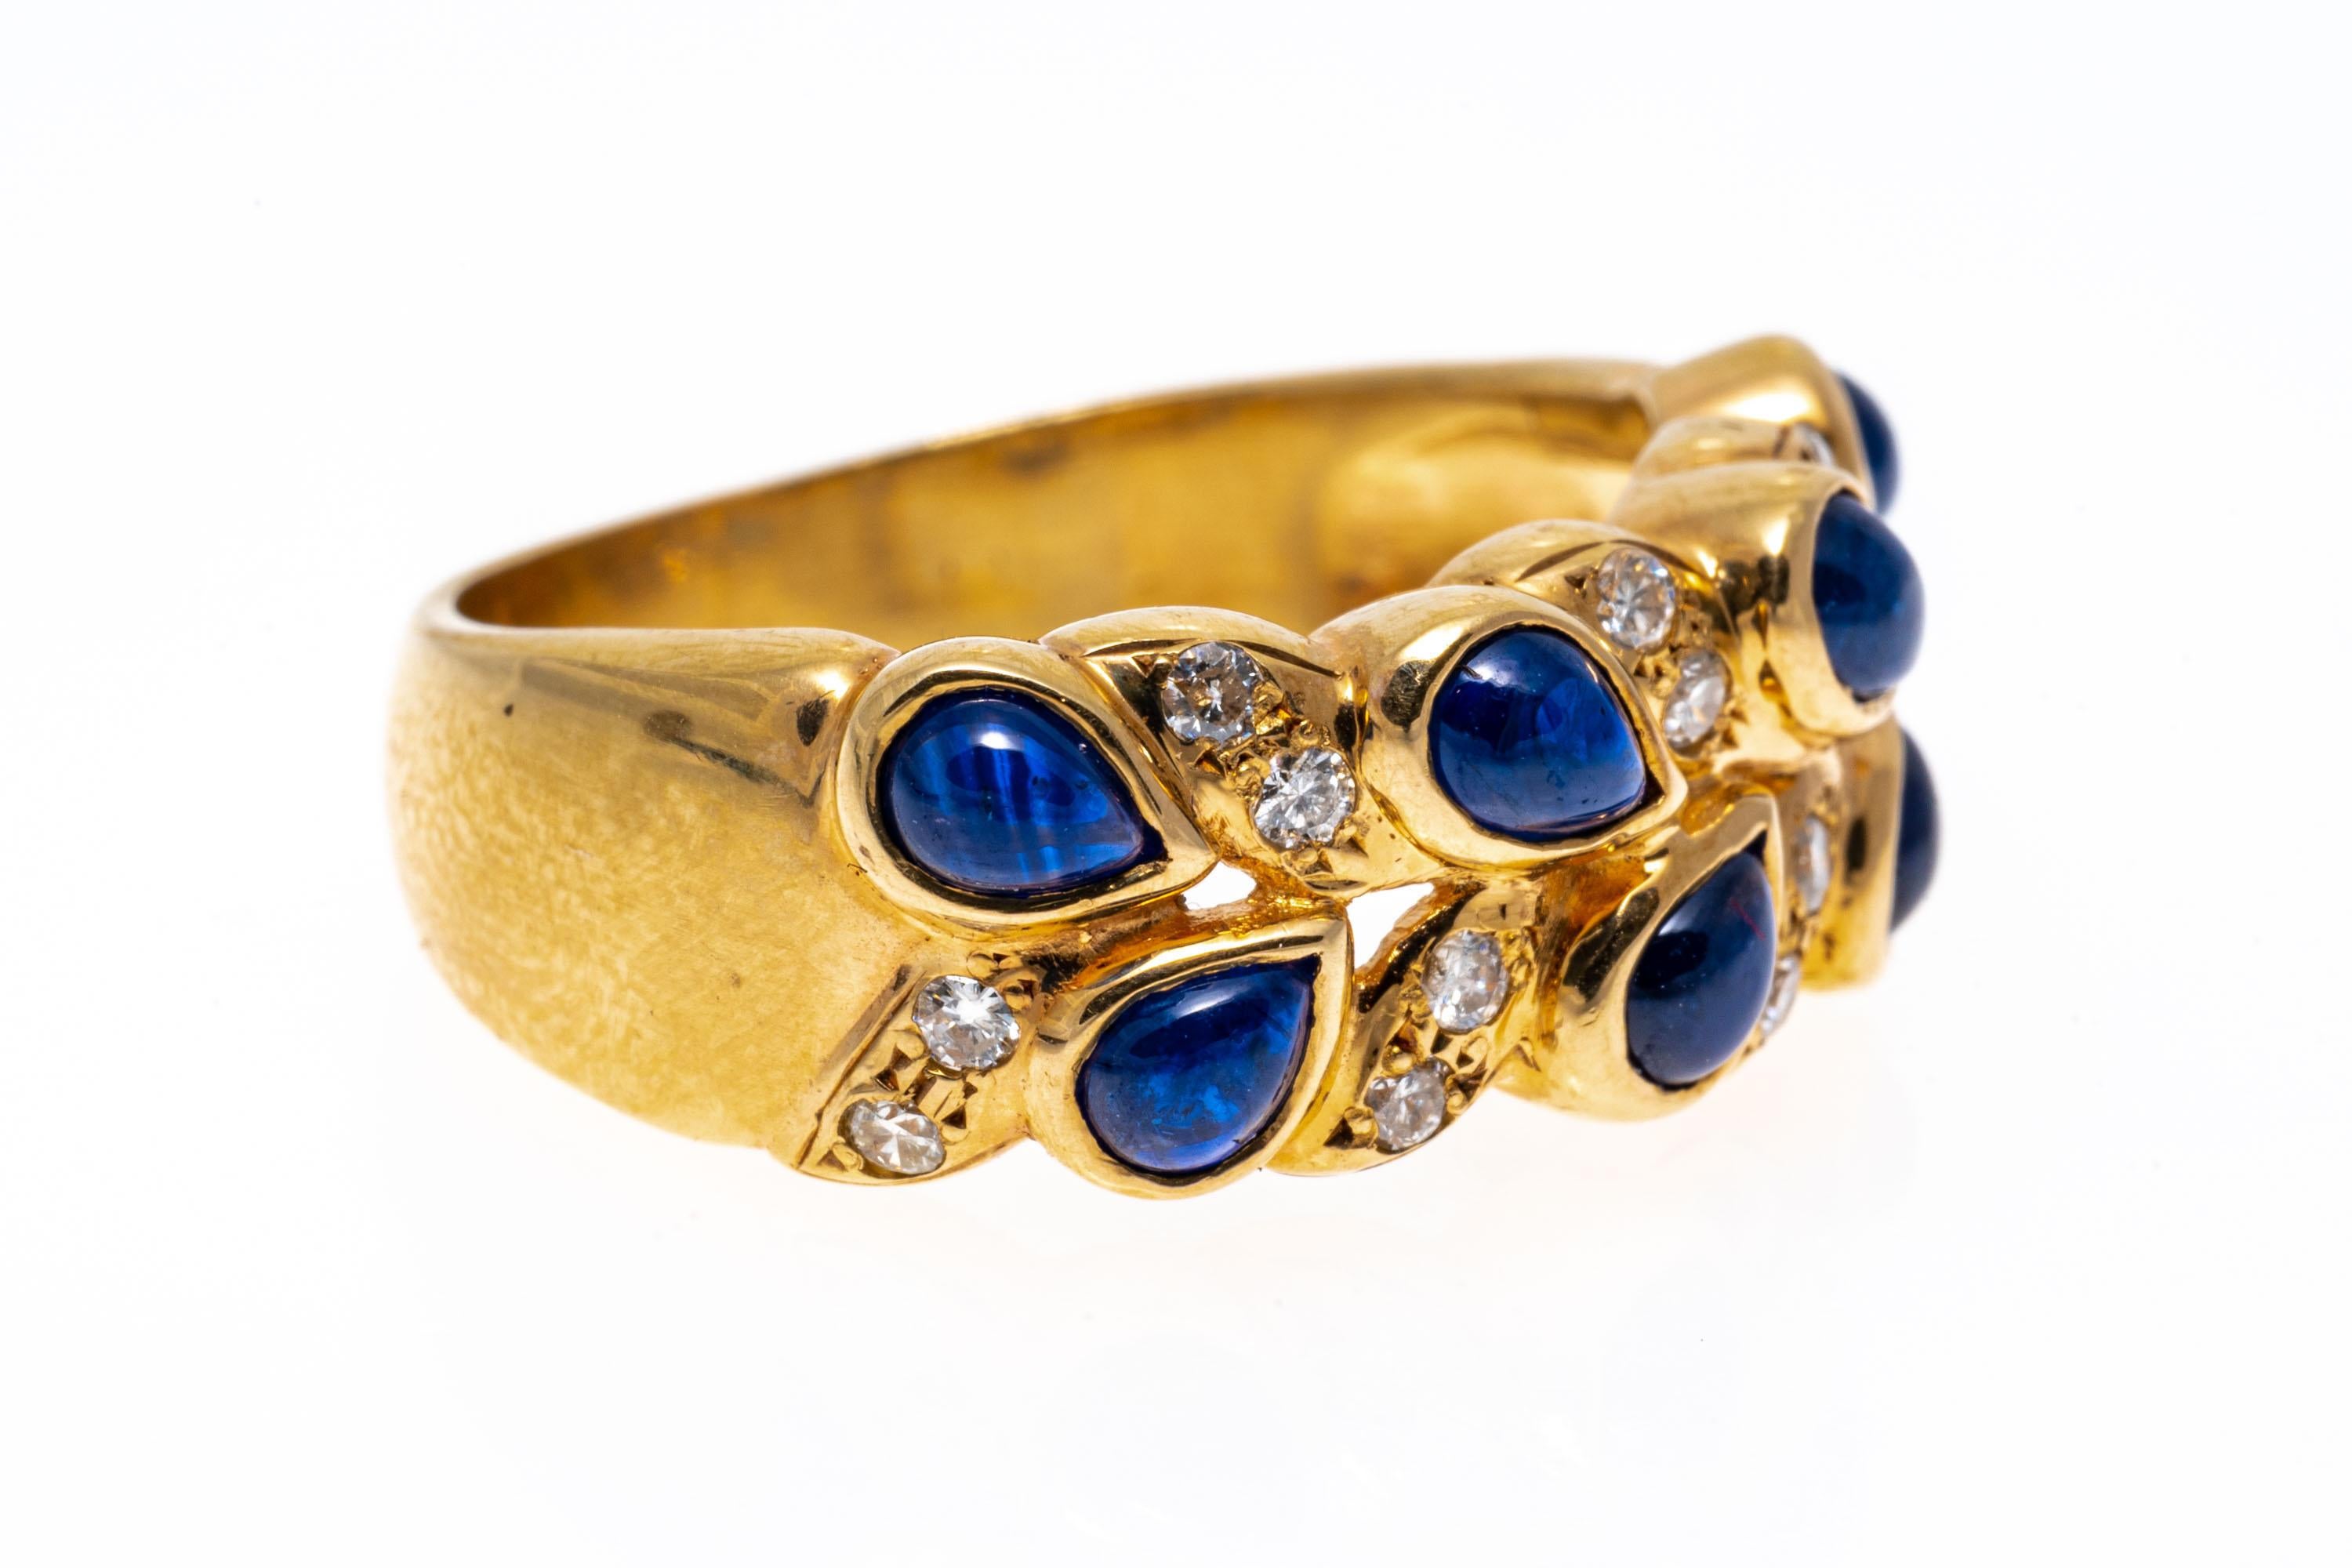 Modern 14k Yellow Gold Pear Shaped Cabachon Blue Sapphire And Diamond Dome Ring, Size 7 For Sale